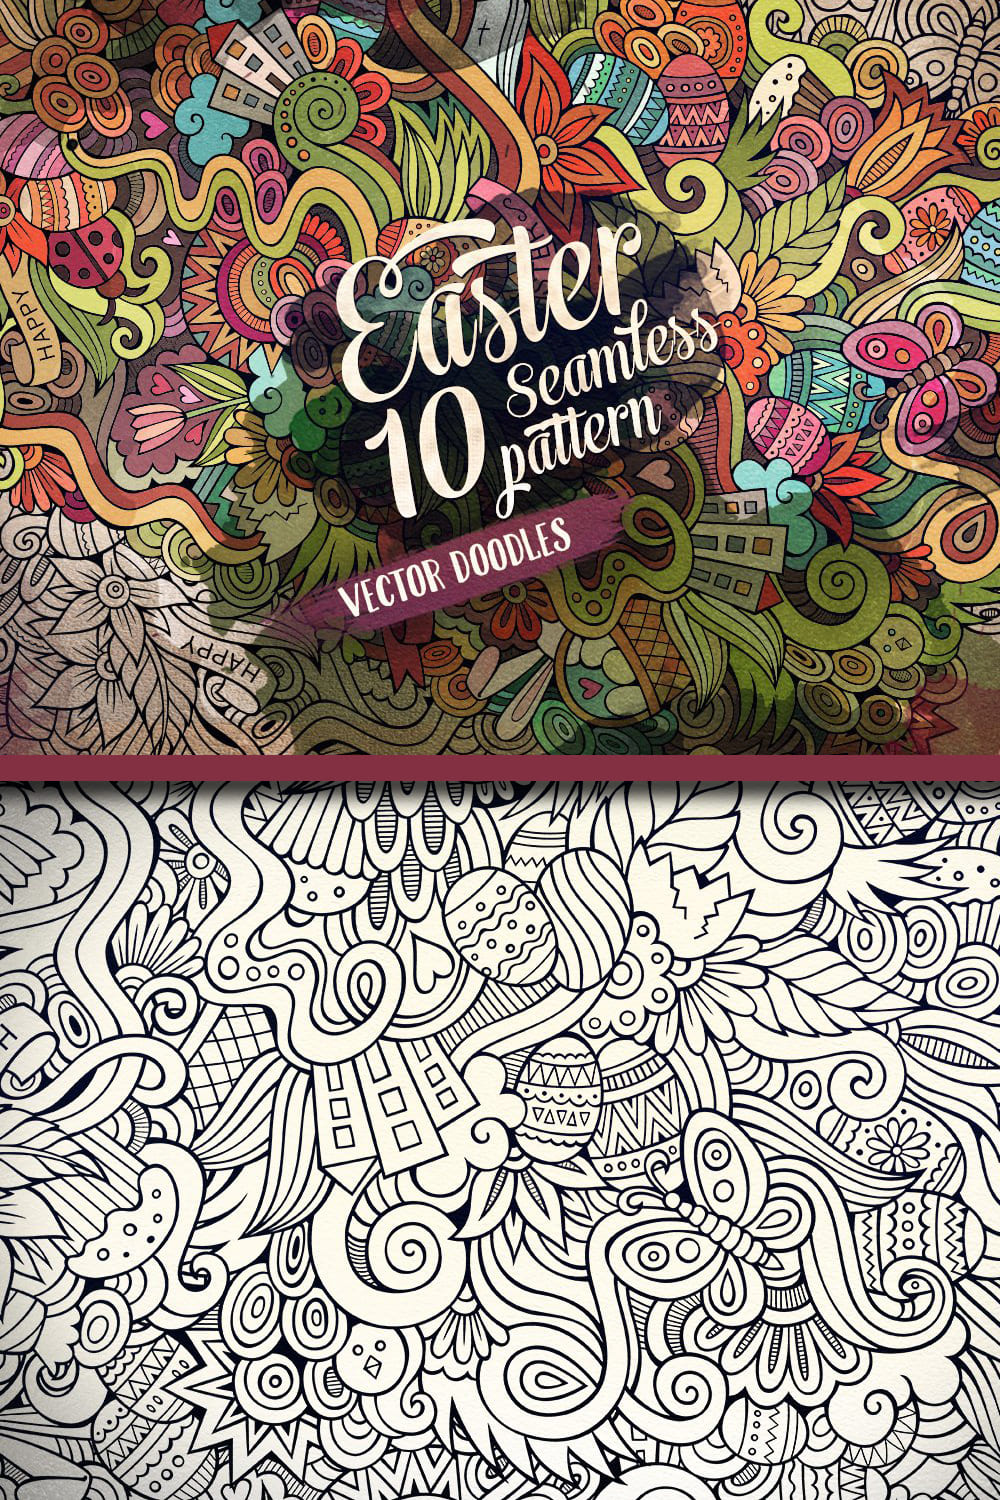 Nice colors for Easter illustrations.